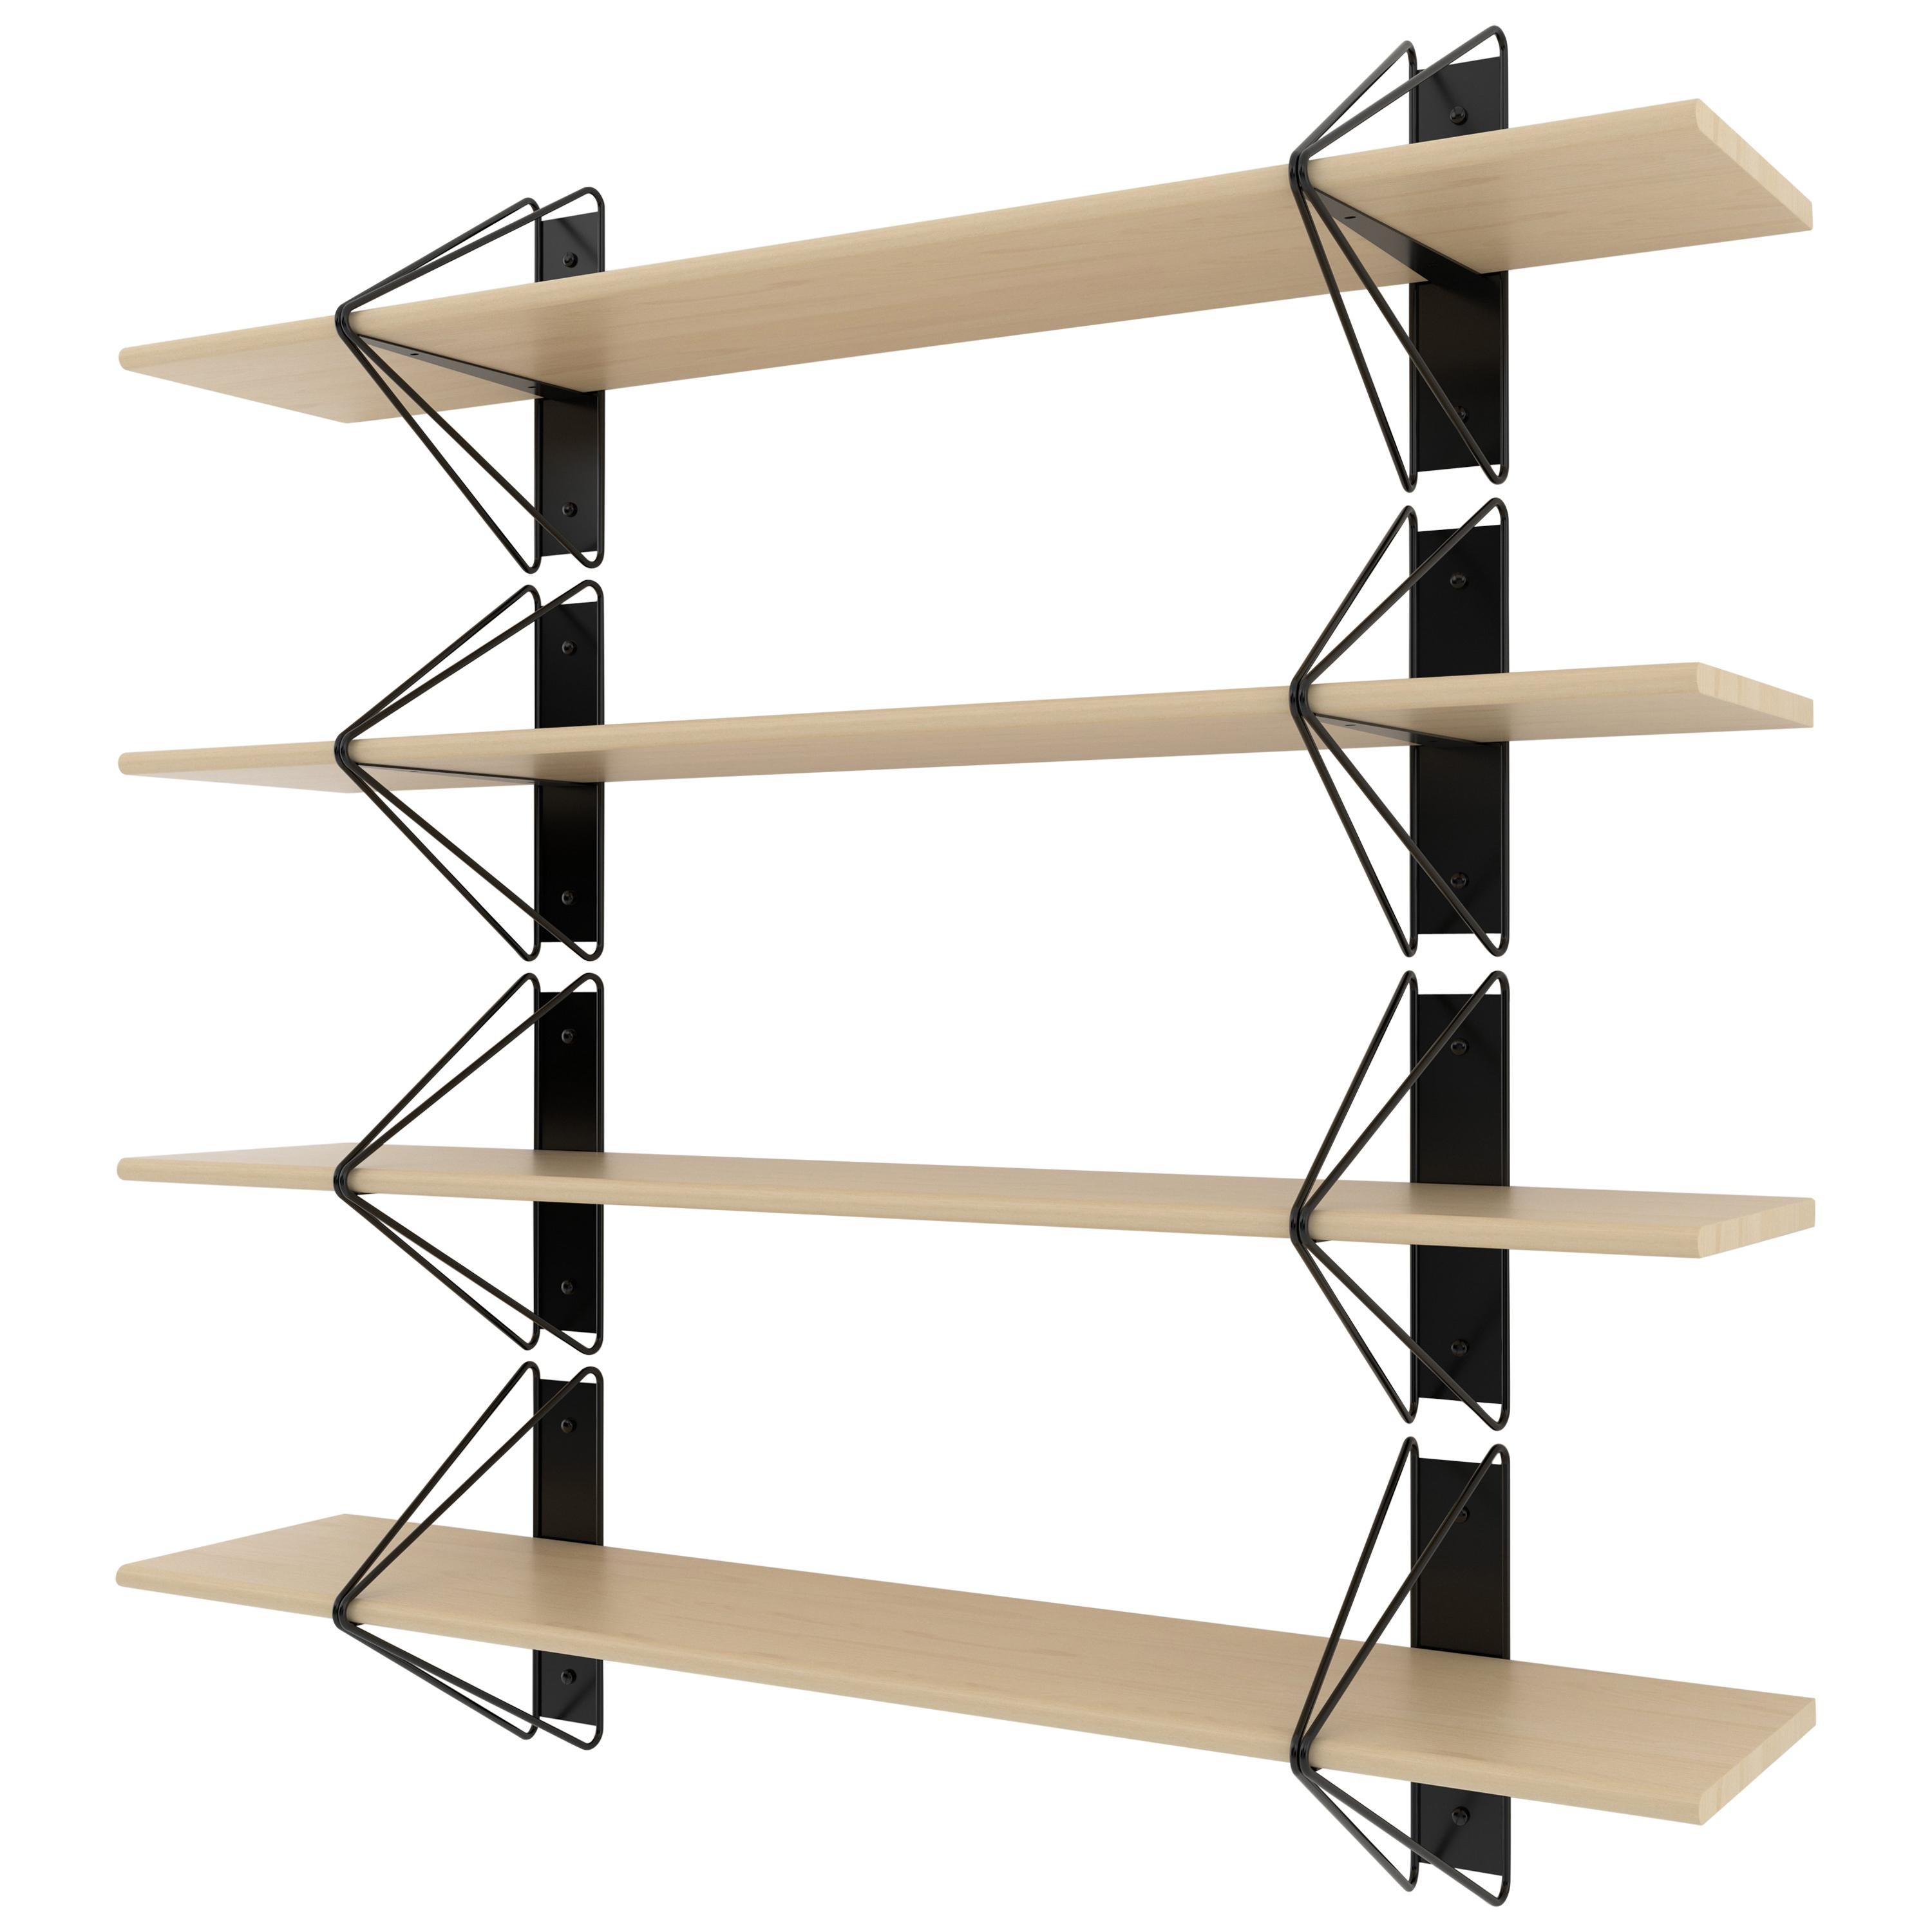 American Set of 3 Strut Shelves from Souda, 84in, Black and Walnut, Made to Order For Sale